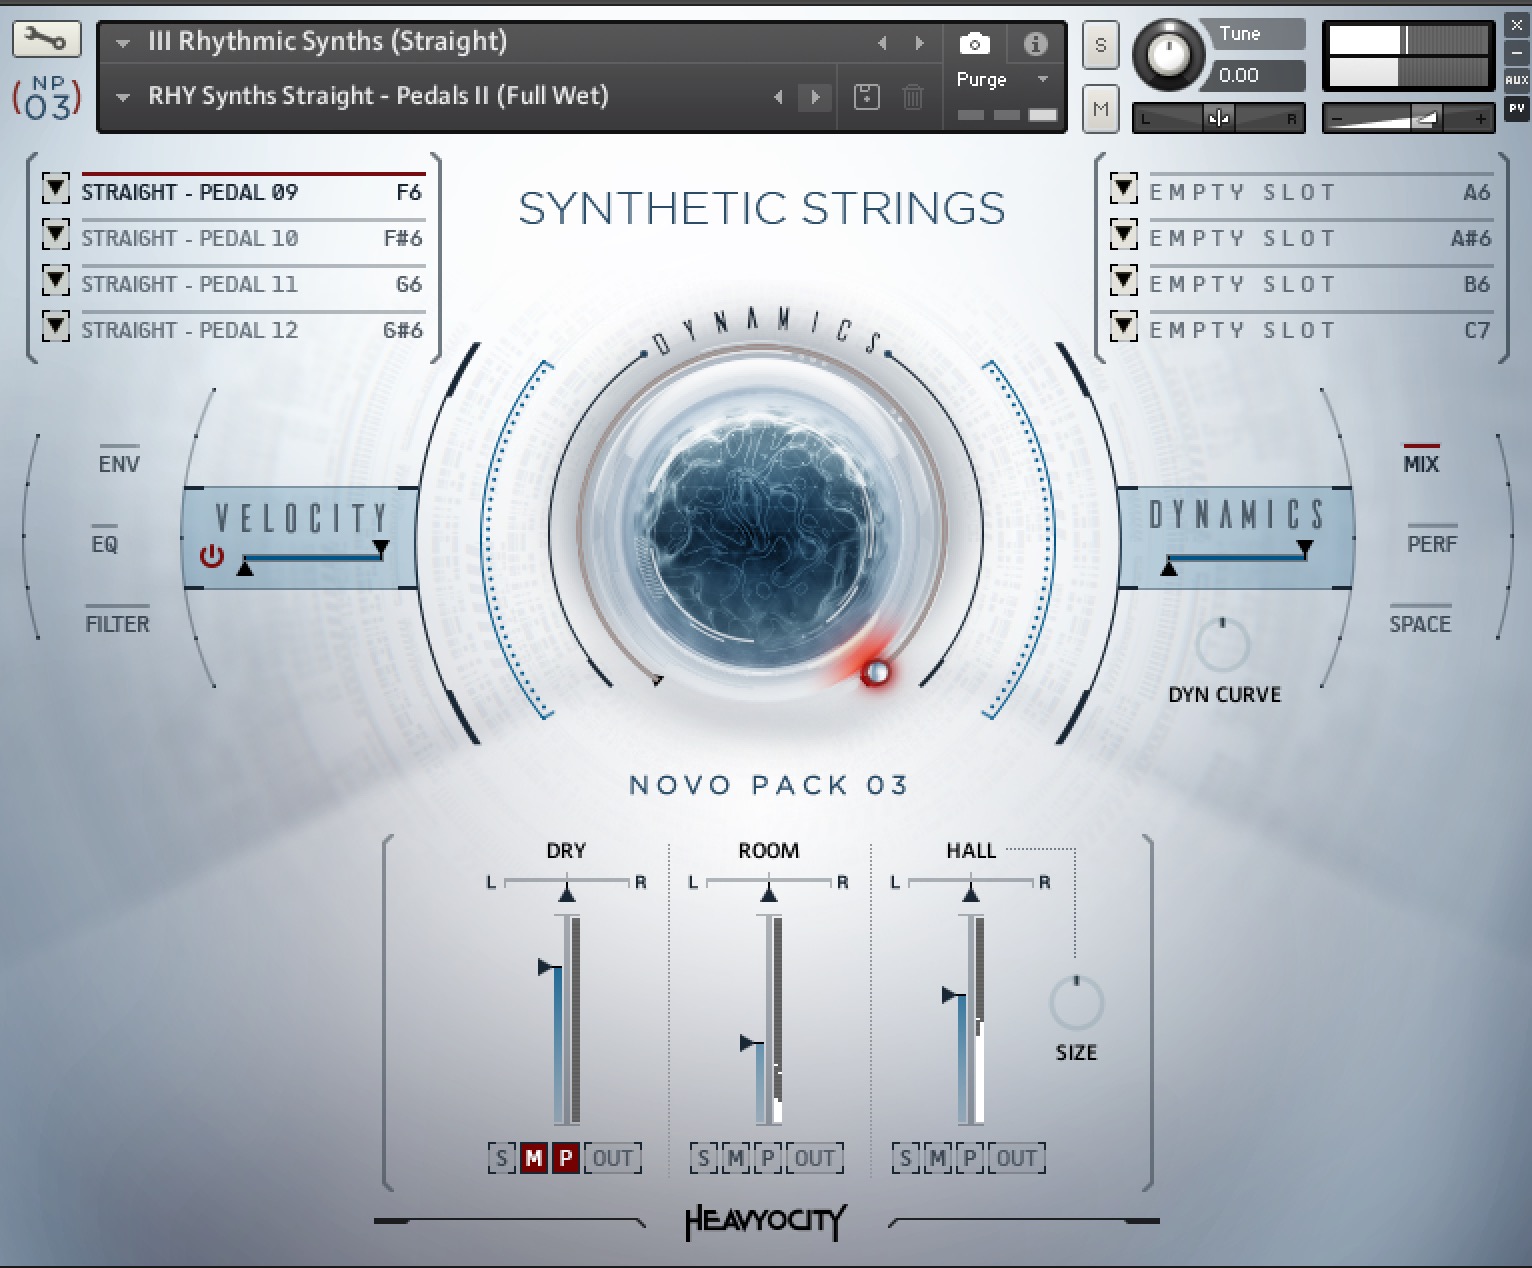 NP03 Synthetic Strings by Heavyocity Media Review III Rhythmic Synths (Straight)